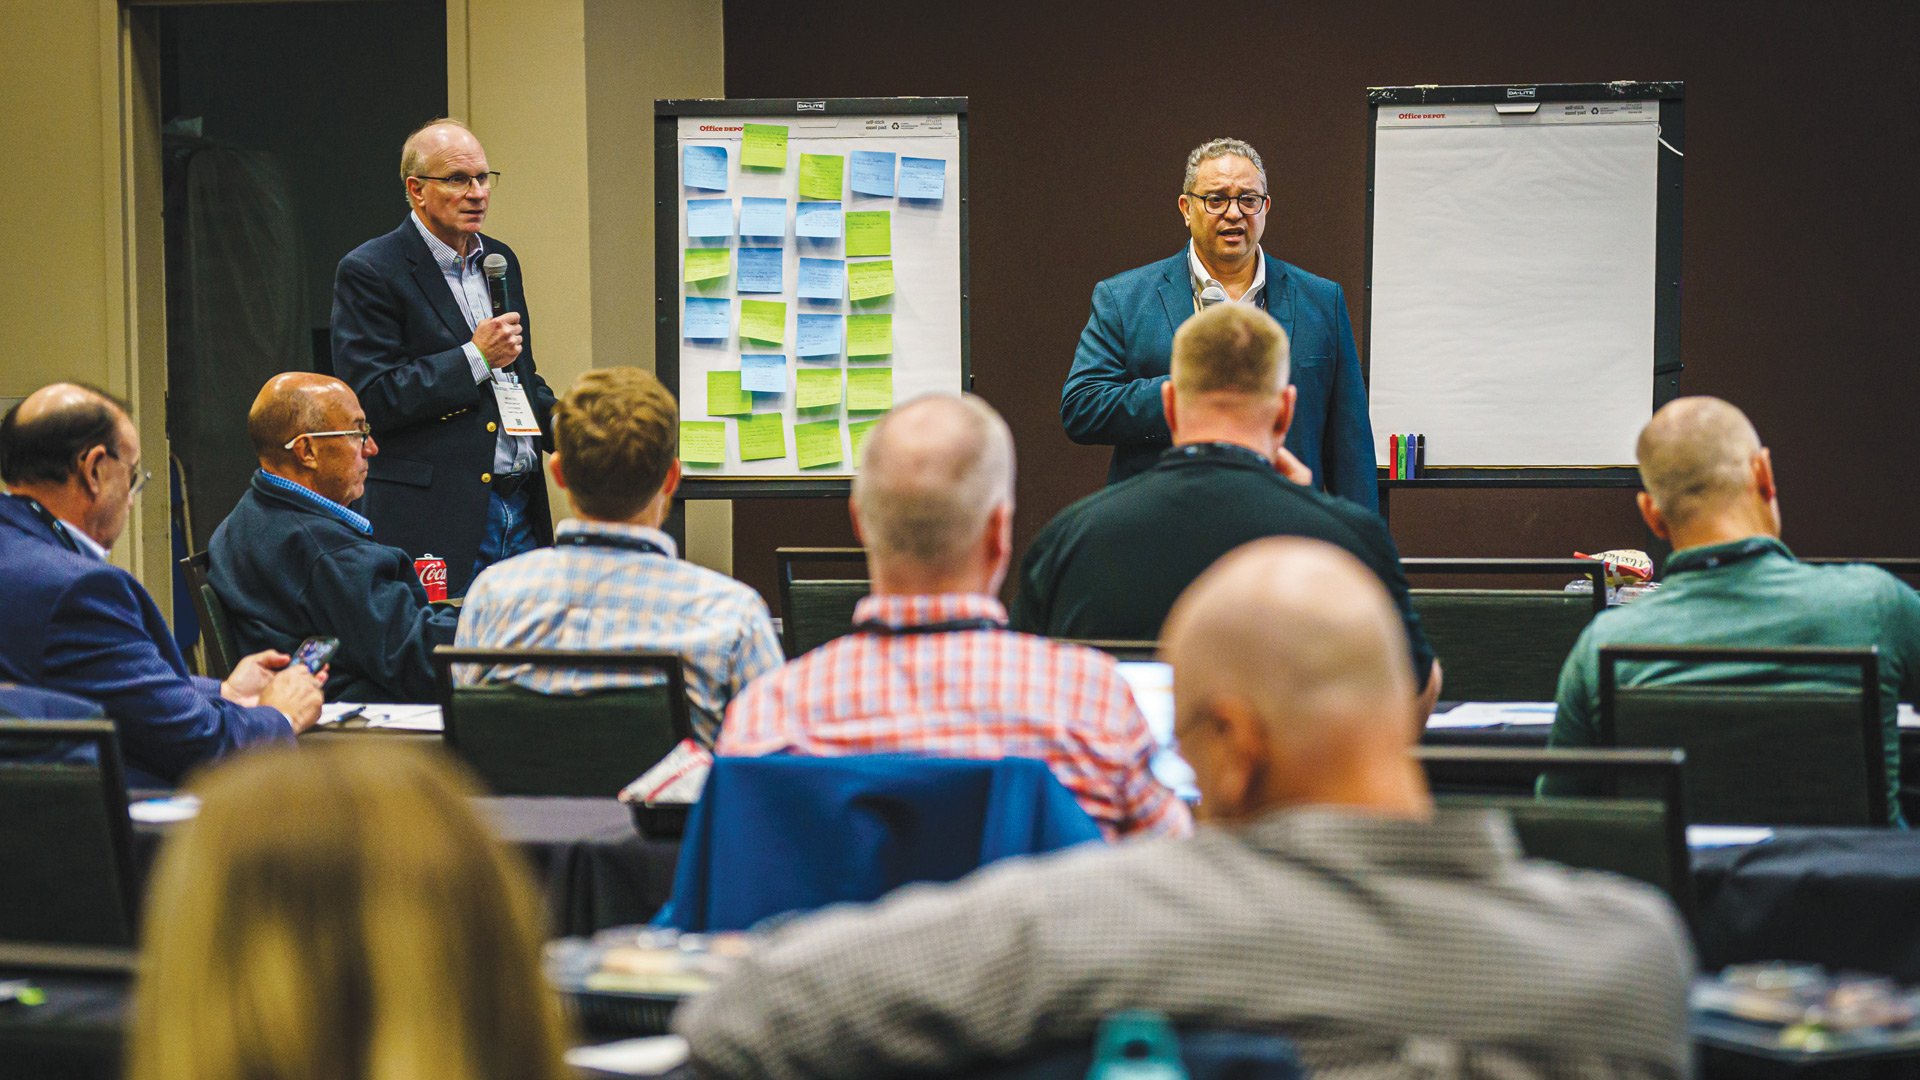 Jim Wetzel (left) and Conrad Leiva (right) leading an educational workshop at SOUTHTEC 2023, “Smart Manufacturing: Why It Matters and How to Achieve It,” sharing insights on securing the future success of manufacturing operations. (Photo credit: David Butler II)